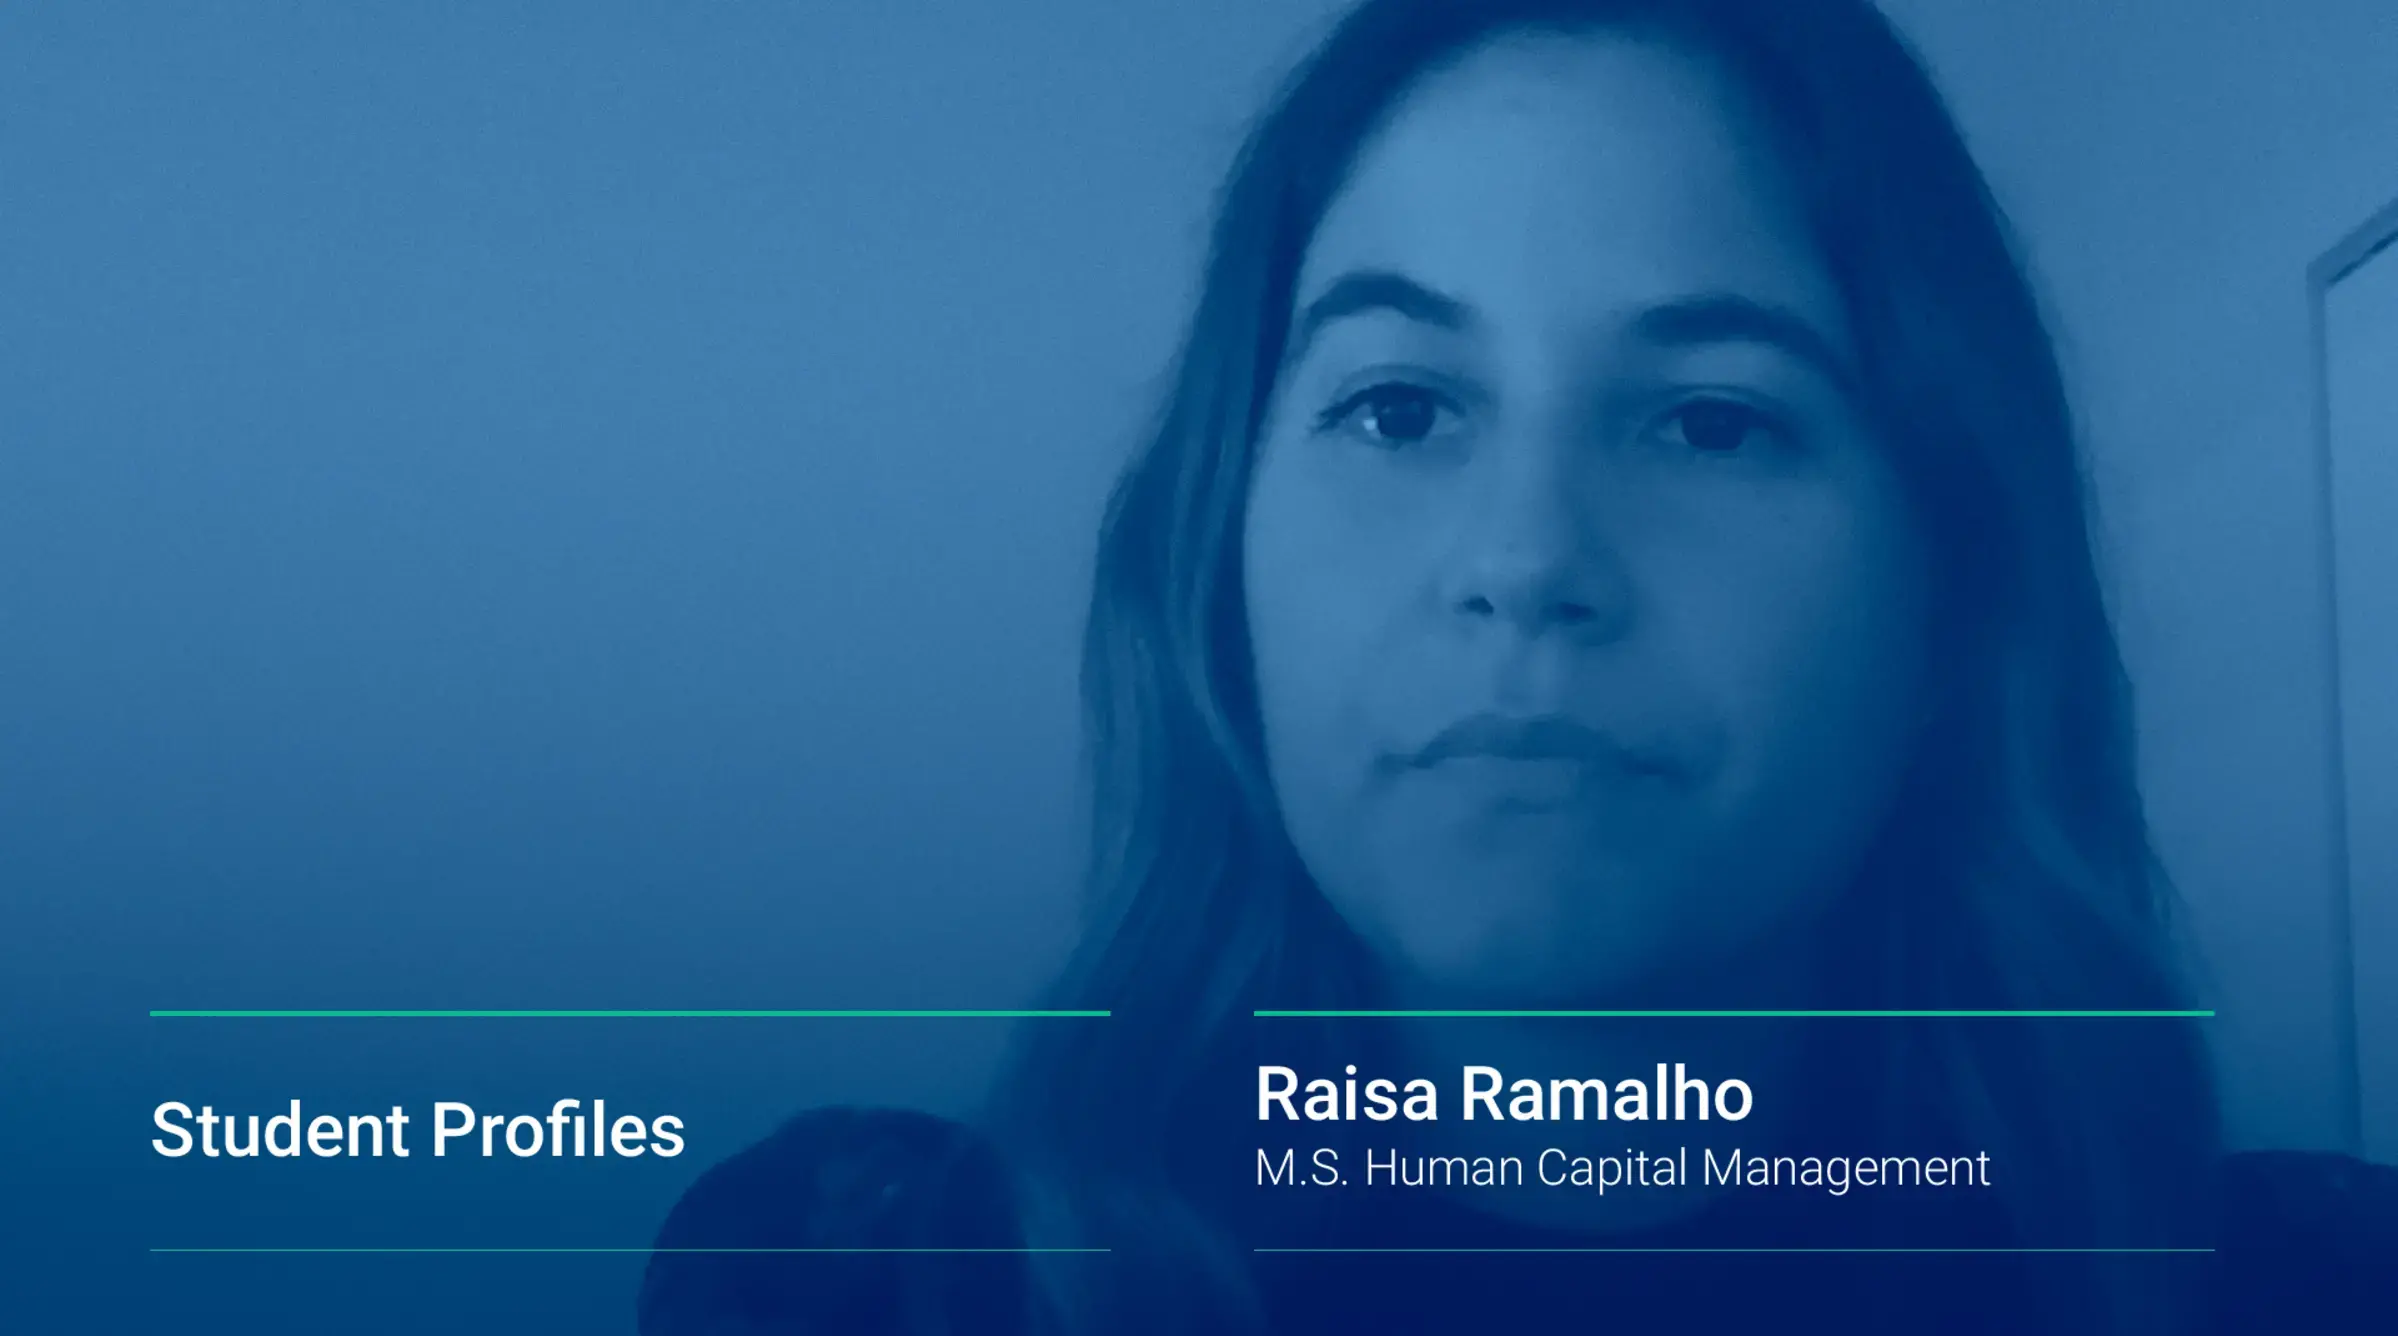 A cover image displays a still from Raisa Correa Ramalho's video interview about the Human Capital Management master's program.